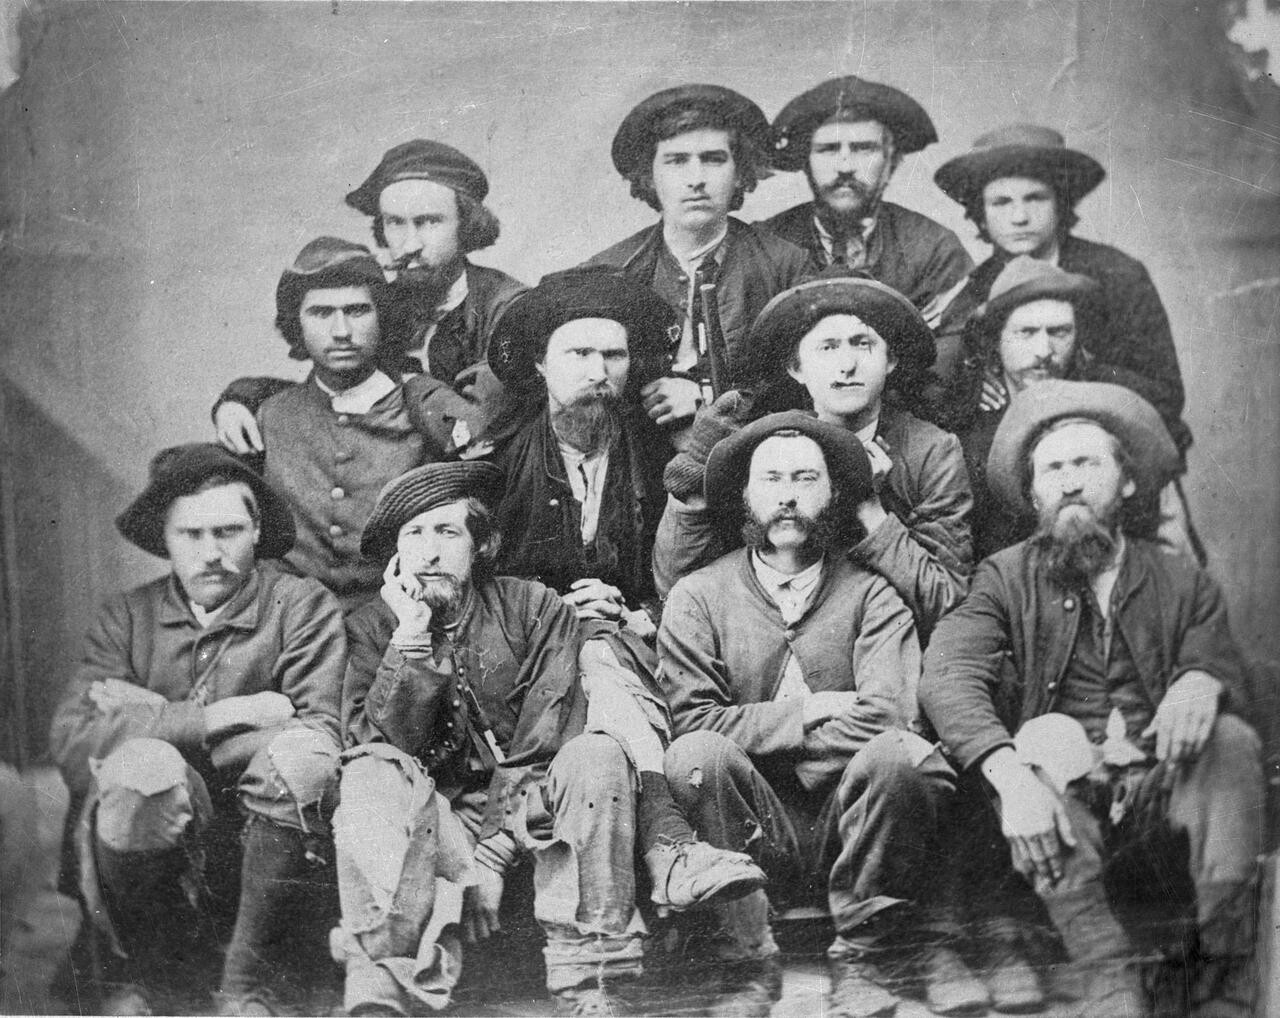 Union officers in Knoxville after escaping confederate prison in 1865